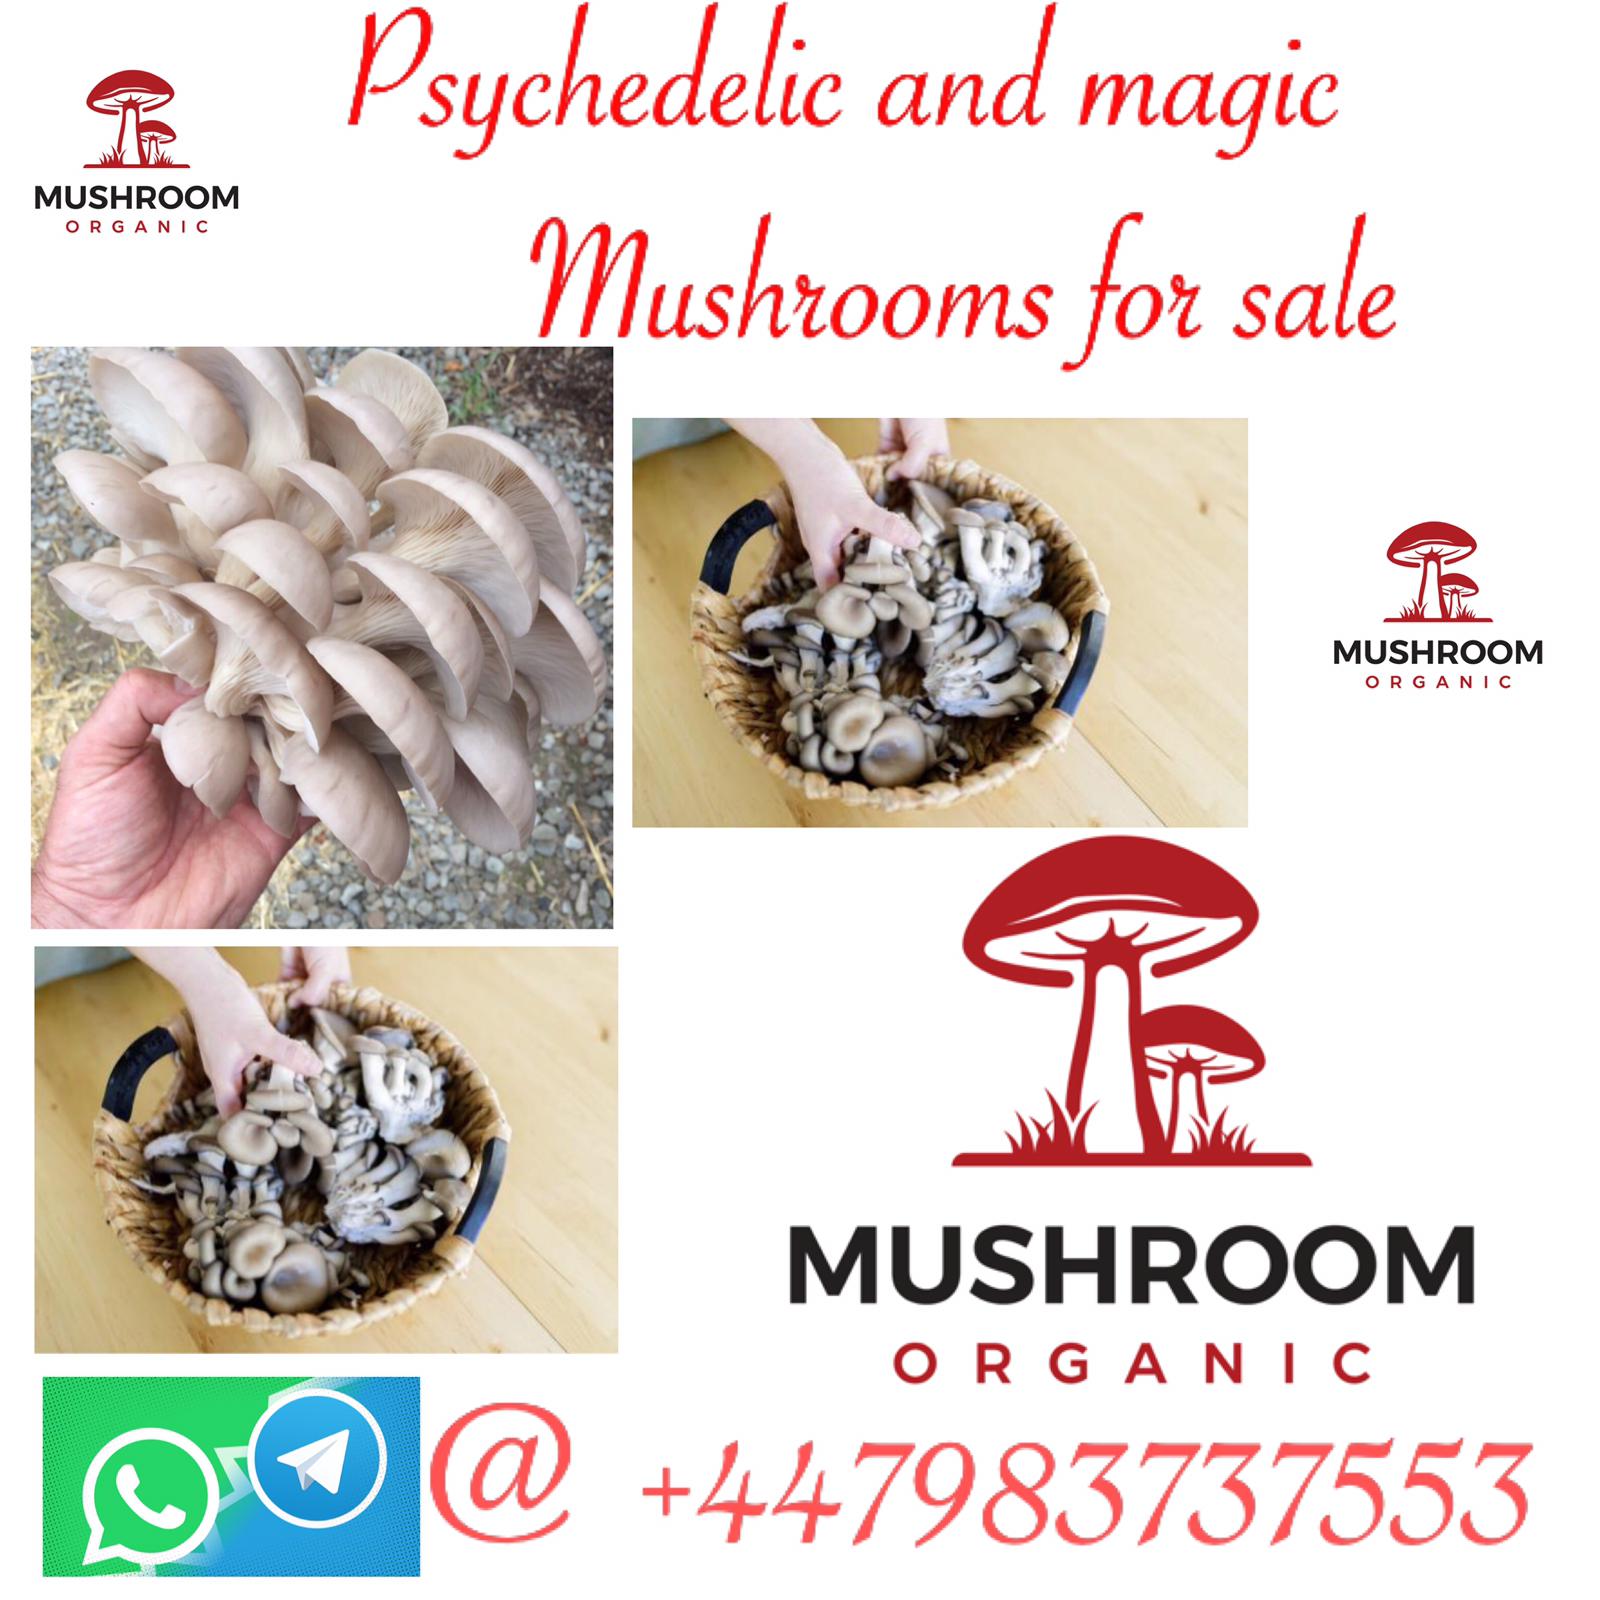 BUY MAGIC AND PSYCHADELIC MUSHROOMS WHATSAPP +447983737553 TO BUY IN MALAYSIA AND SINGAPORE, Online Event